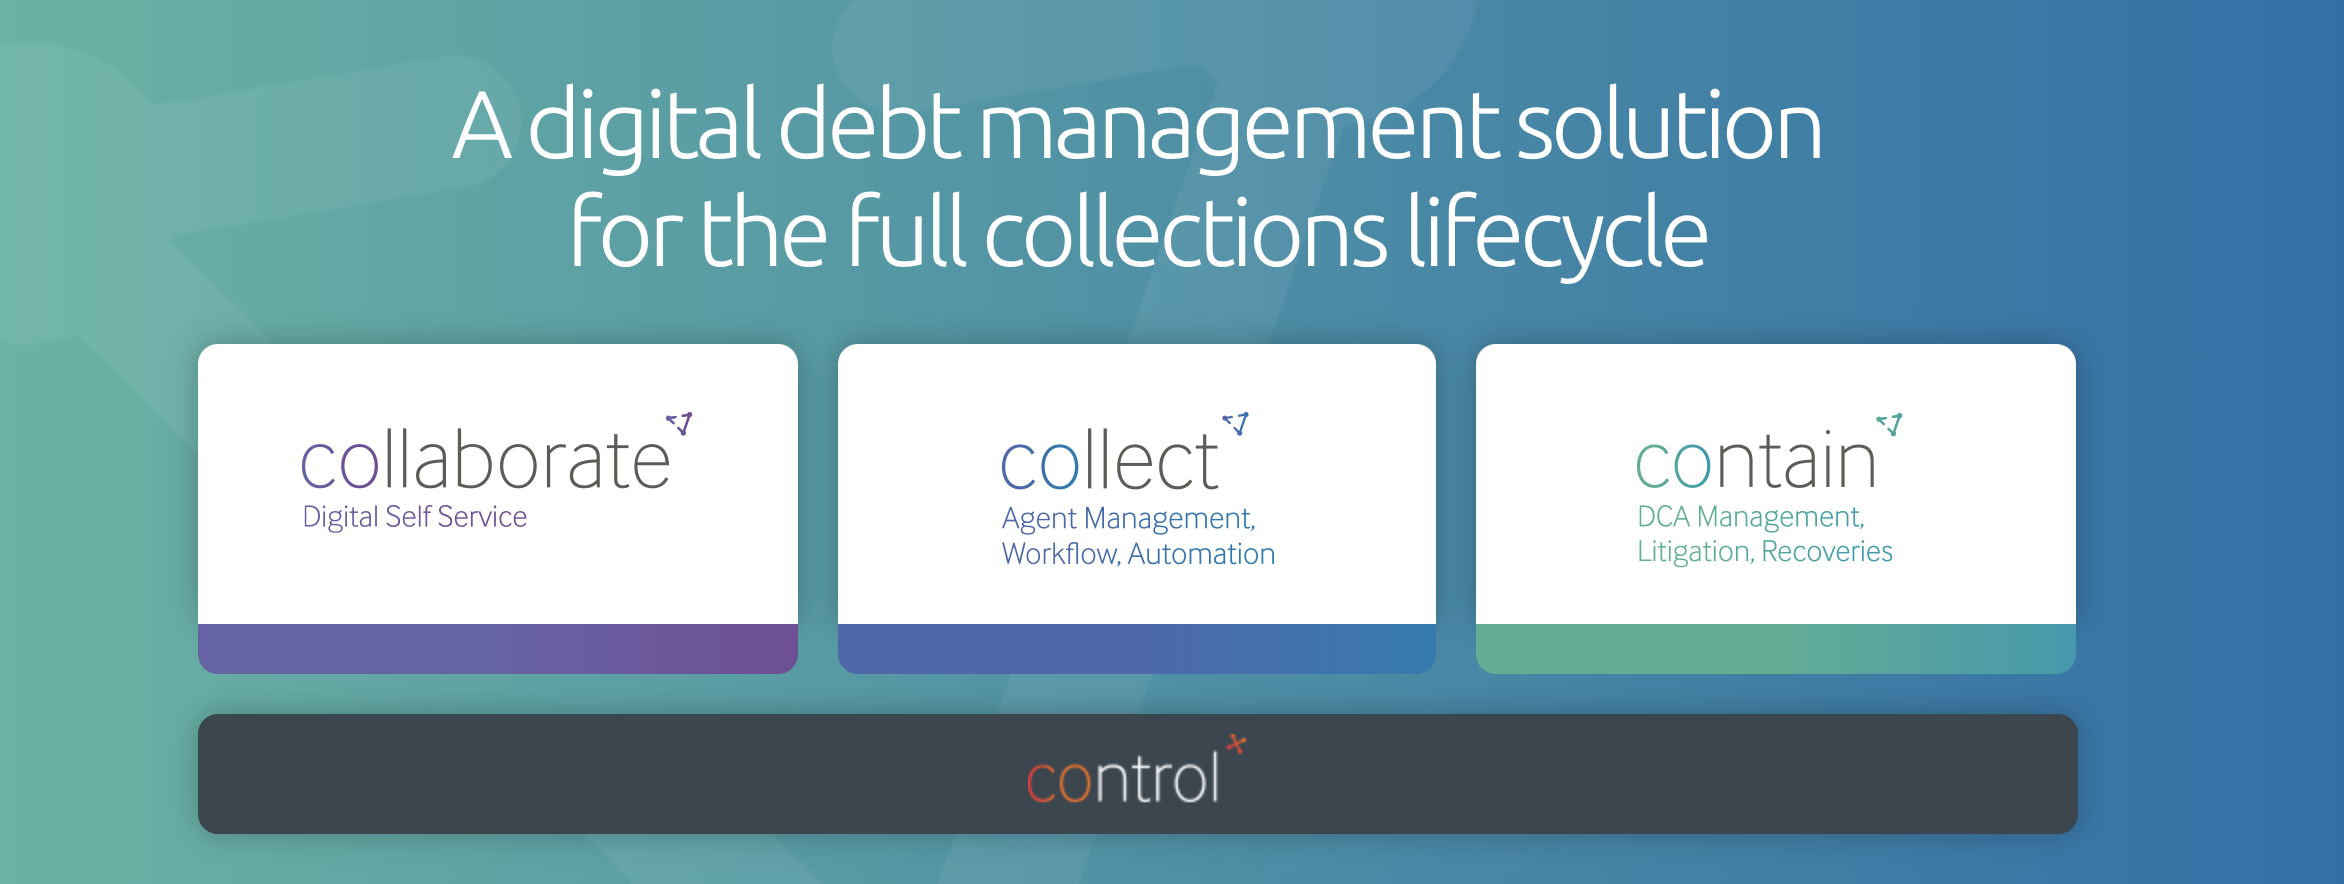 Control+ debt management platform is a single platform delivered in three modules: Collaborate digital self-service, Collect agent management and Contain DCA management.